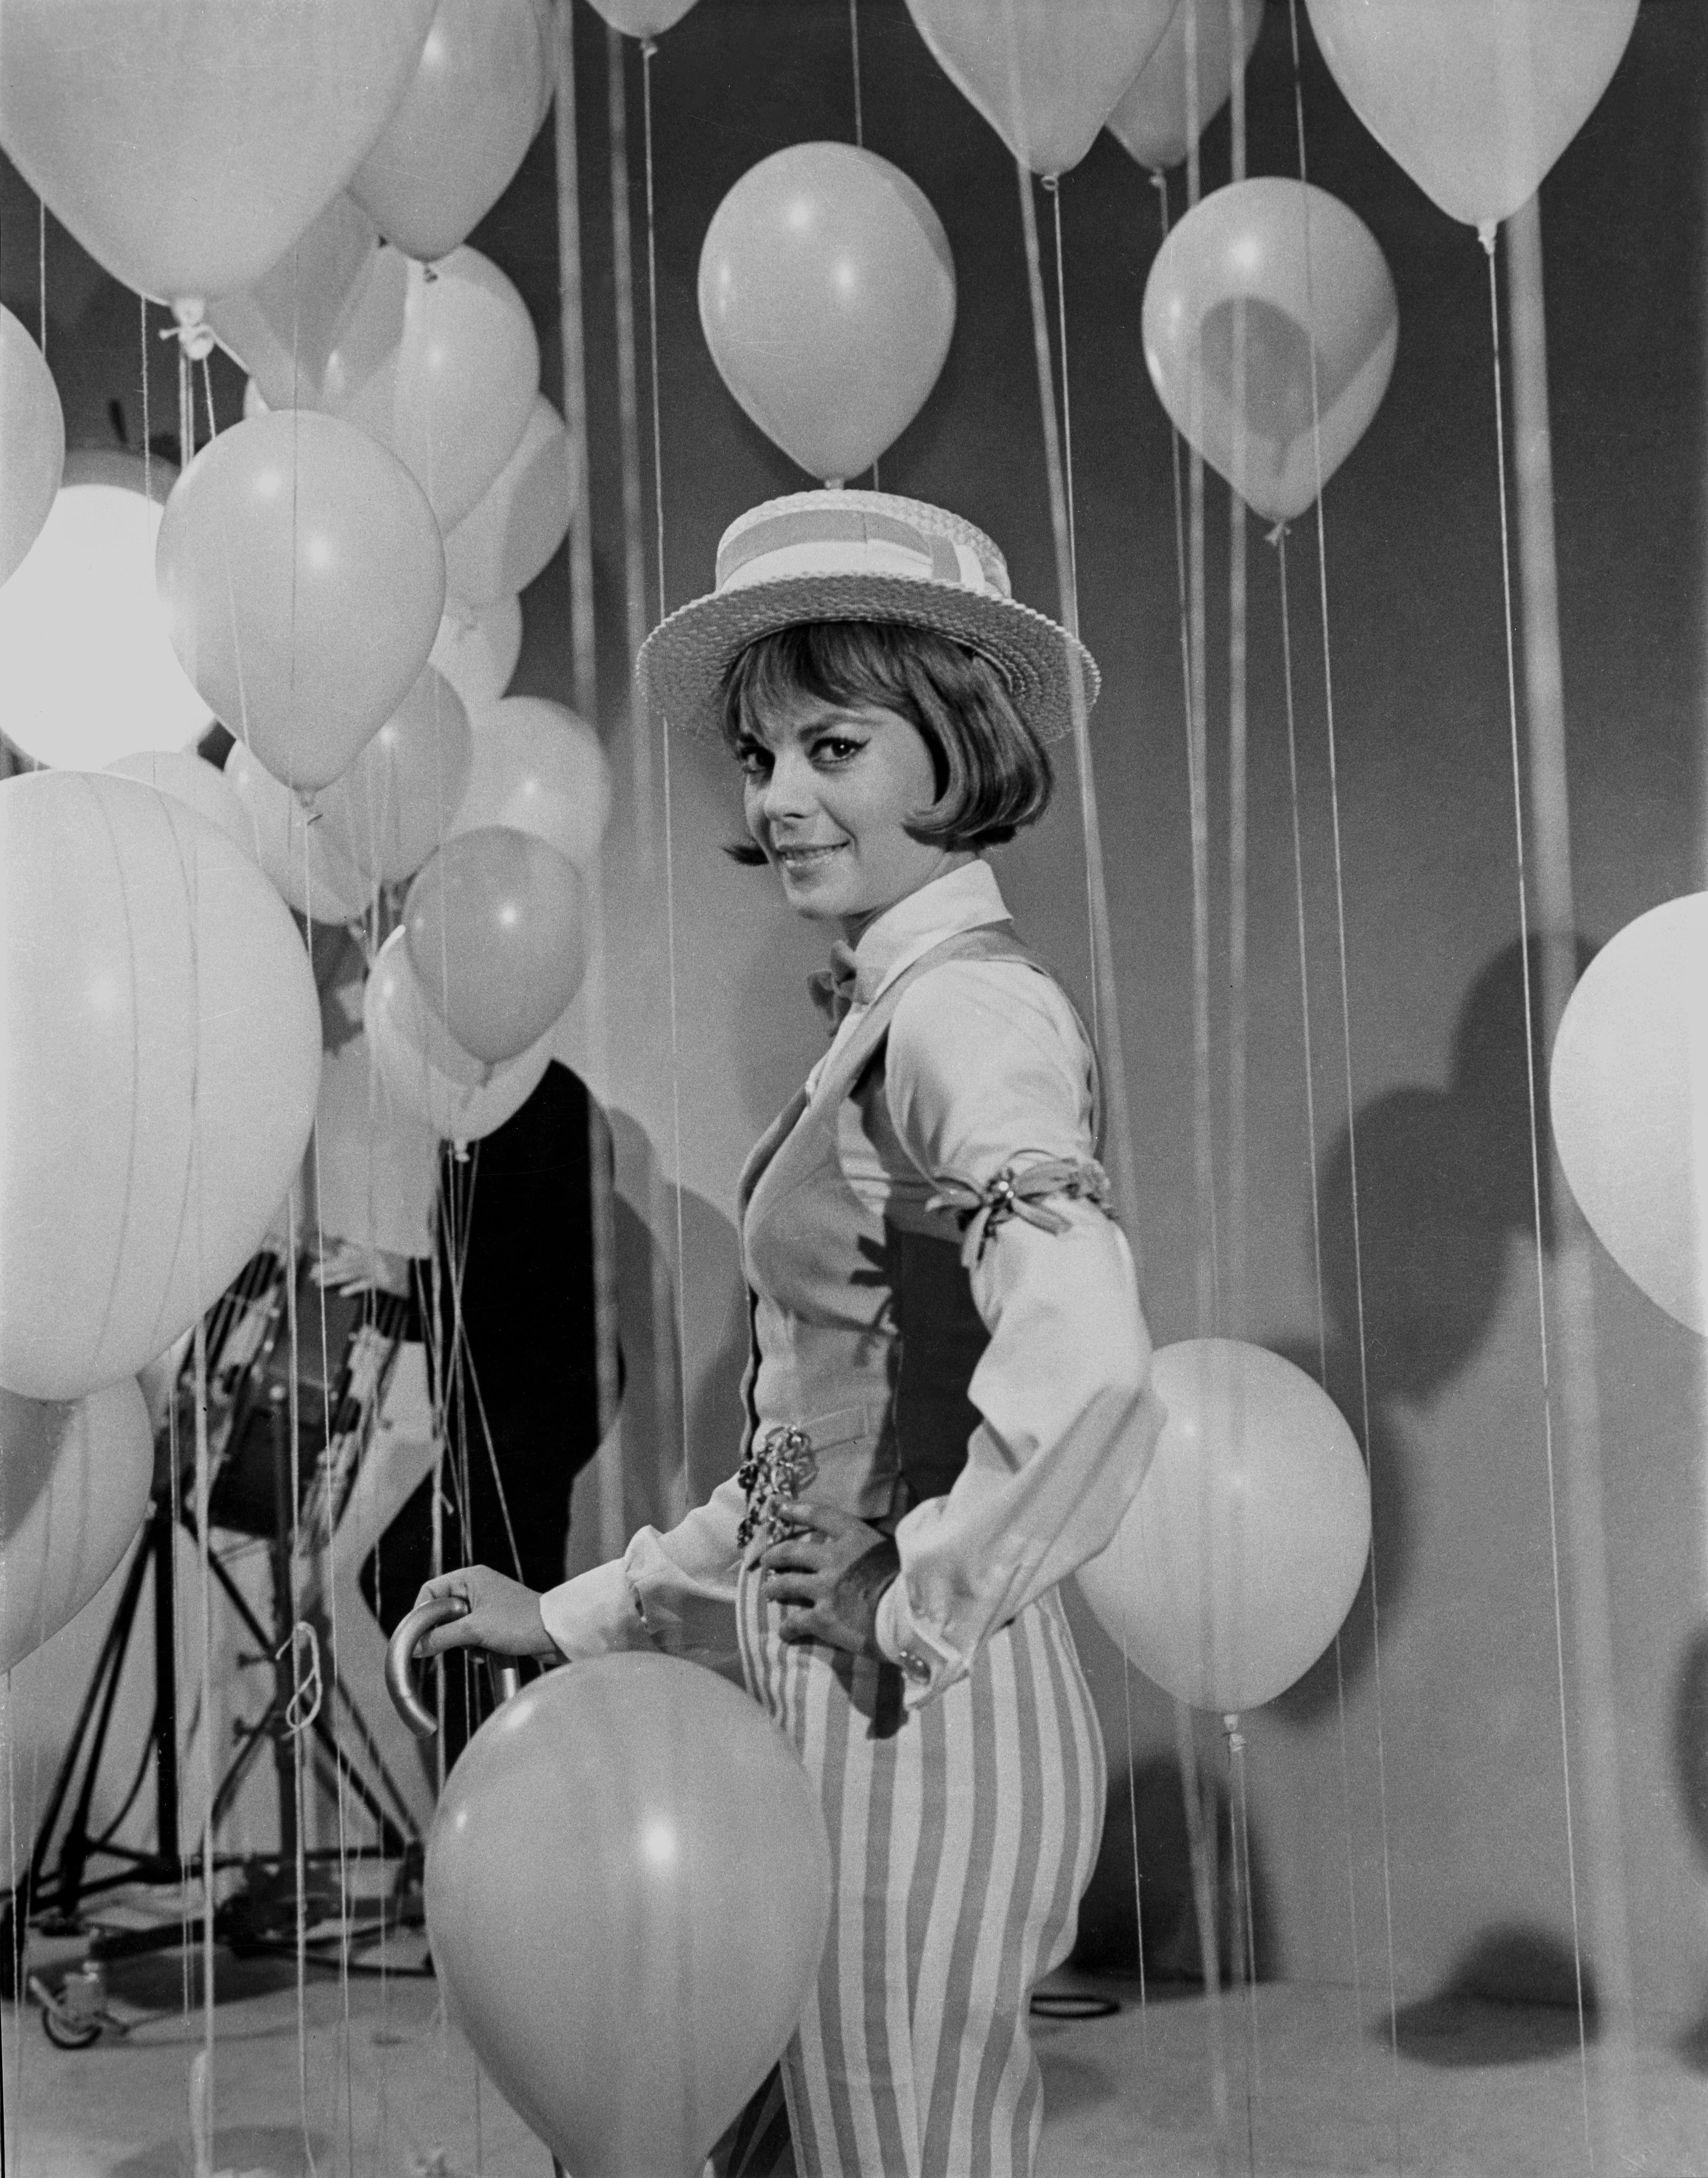 Unknown Portrait Photograph - Natalie Wood with Balloons Movie Star News Fine Art Print